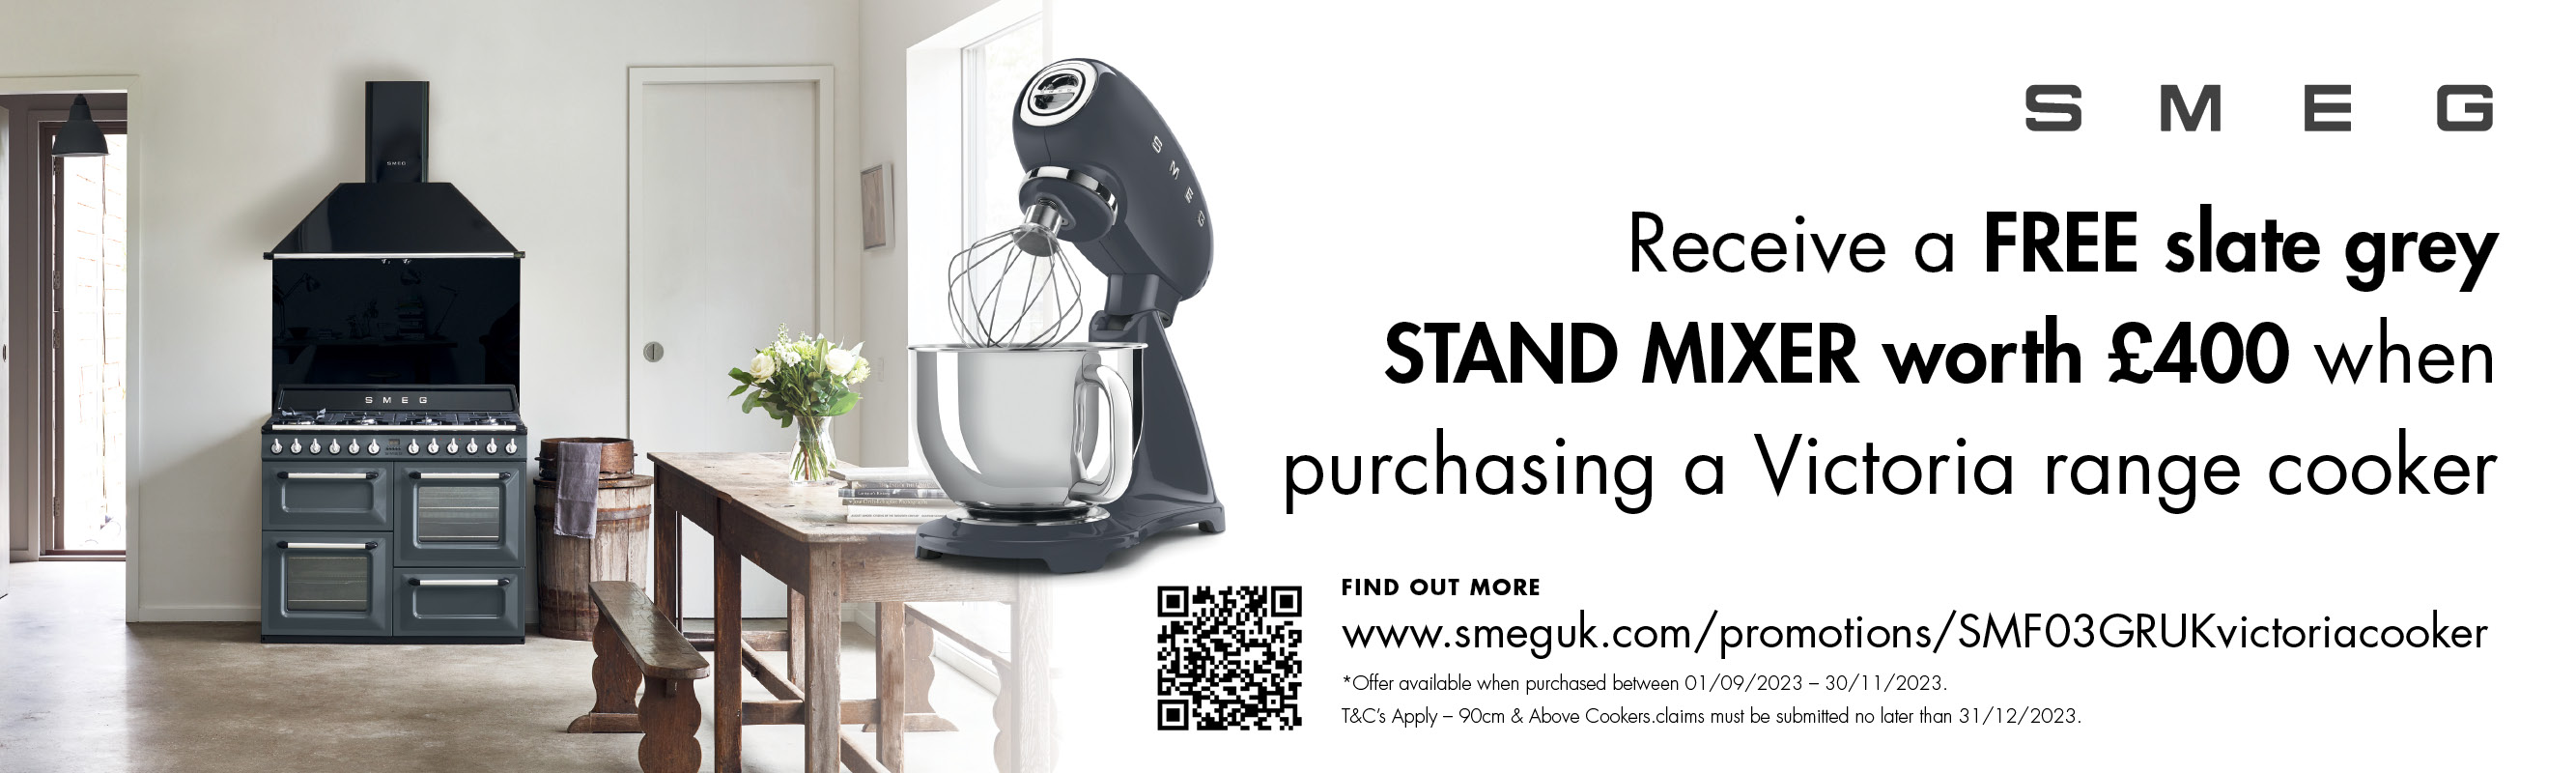 Free Stand Mixer Promotion